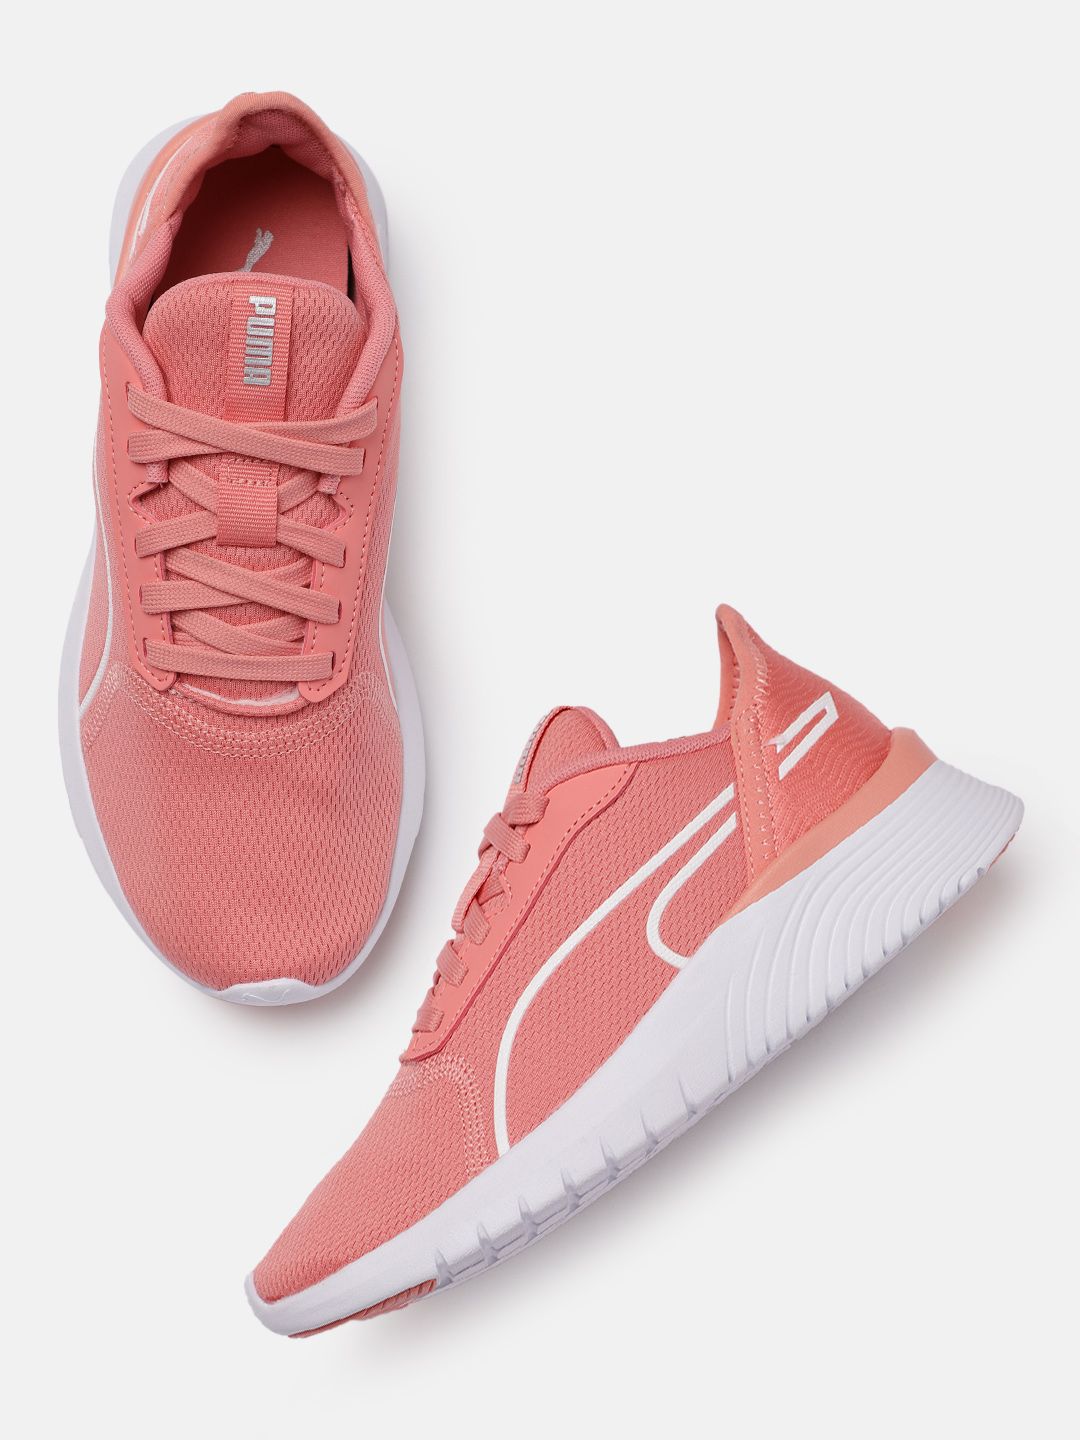 Puma Women Coral Pink Solid Remedie Regular Training Or Gym Shoes Price in India